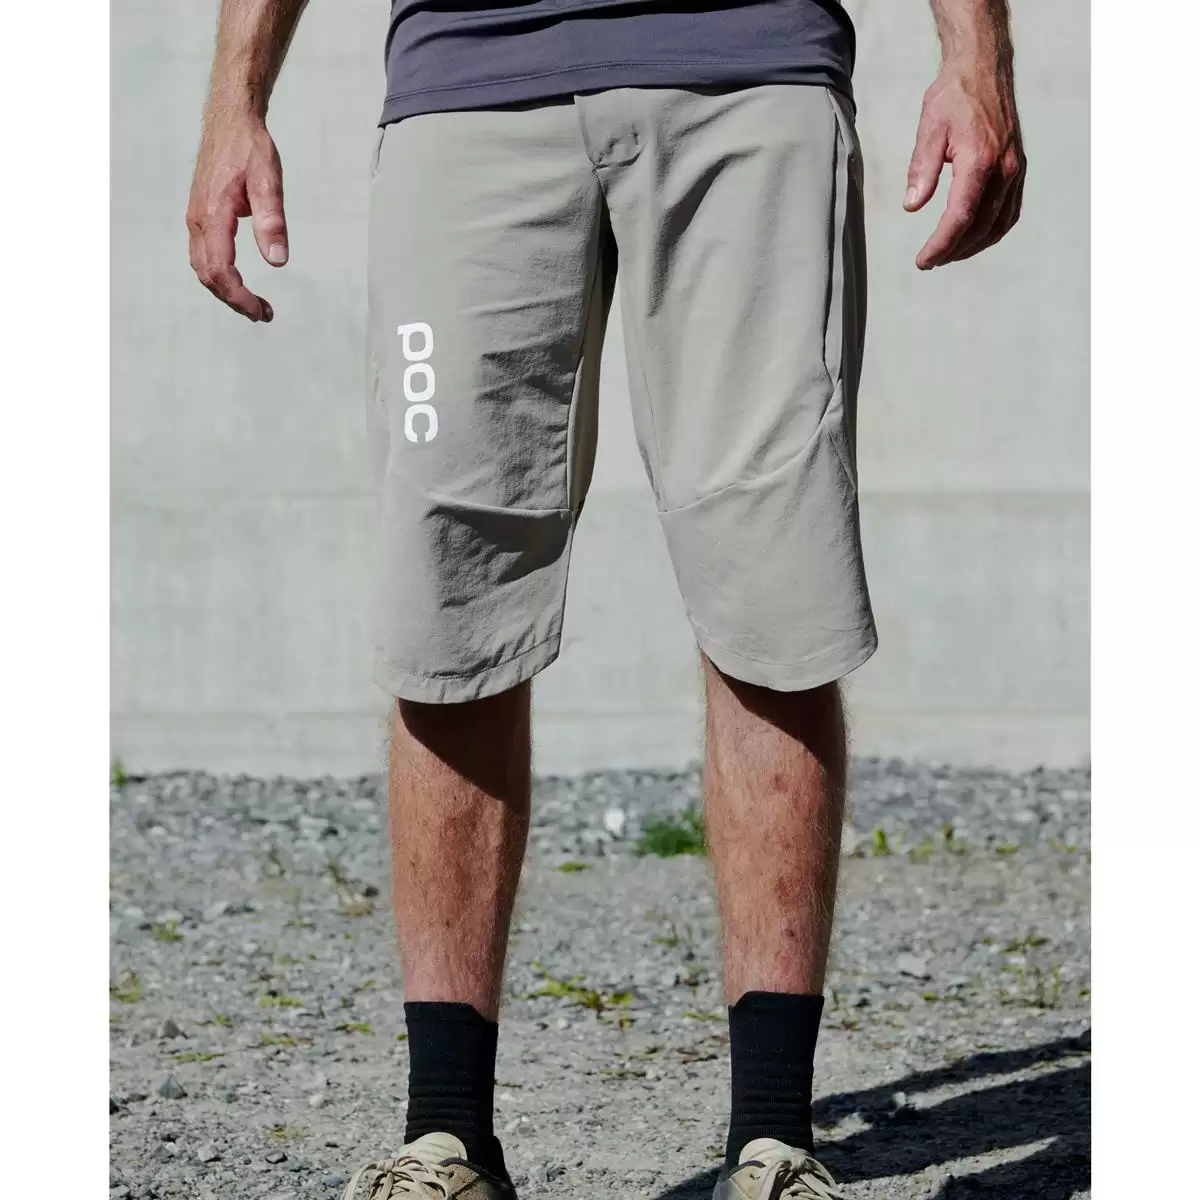 M's Infinite All-mountain shorts Moonstone Grey size S #3